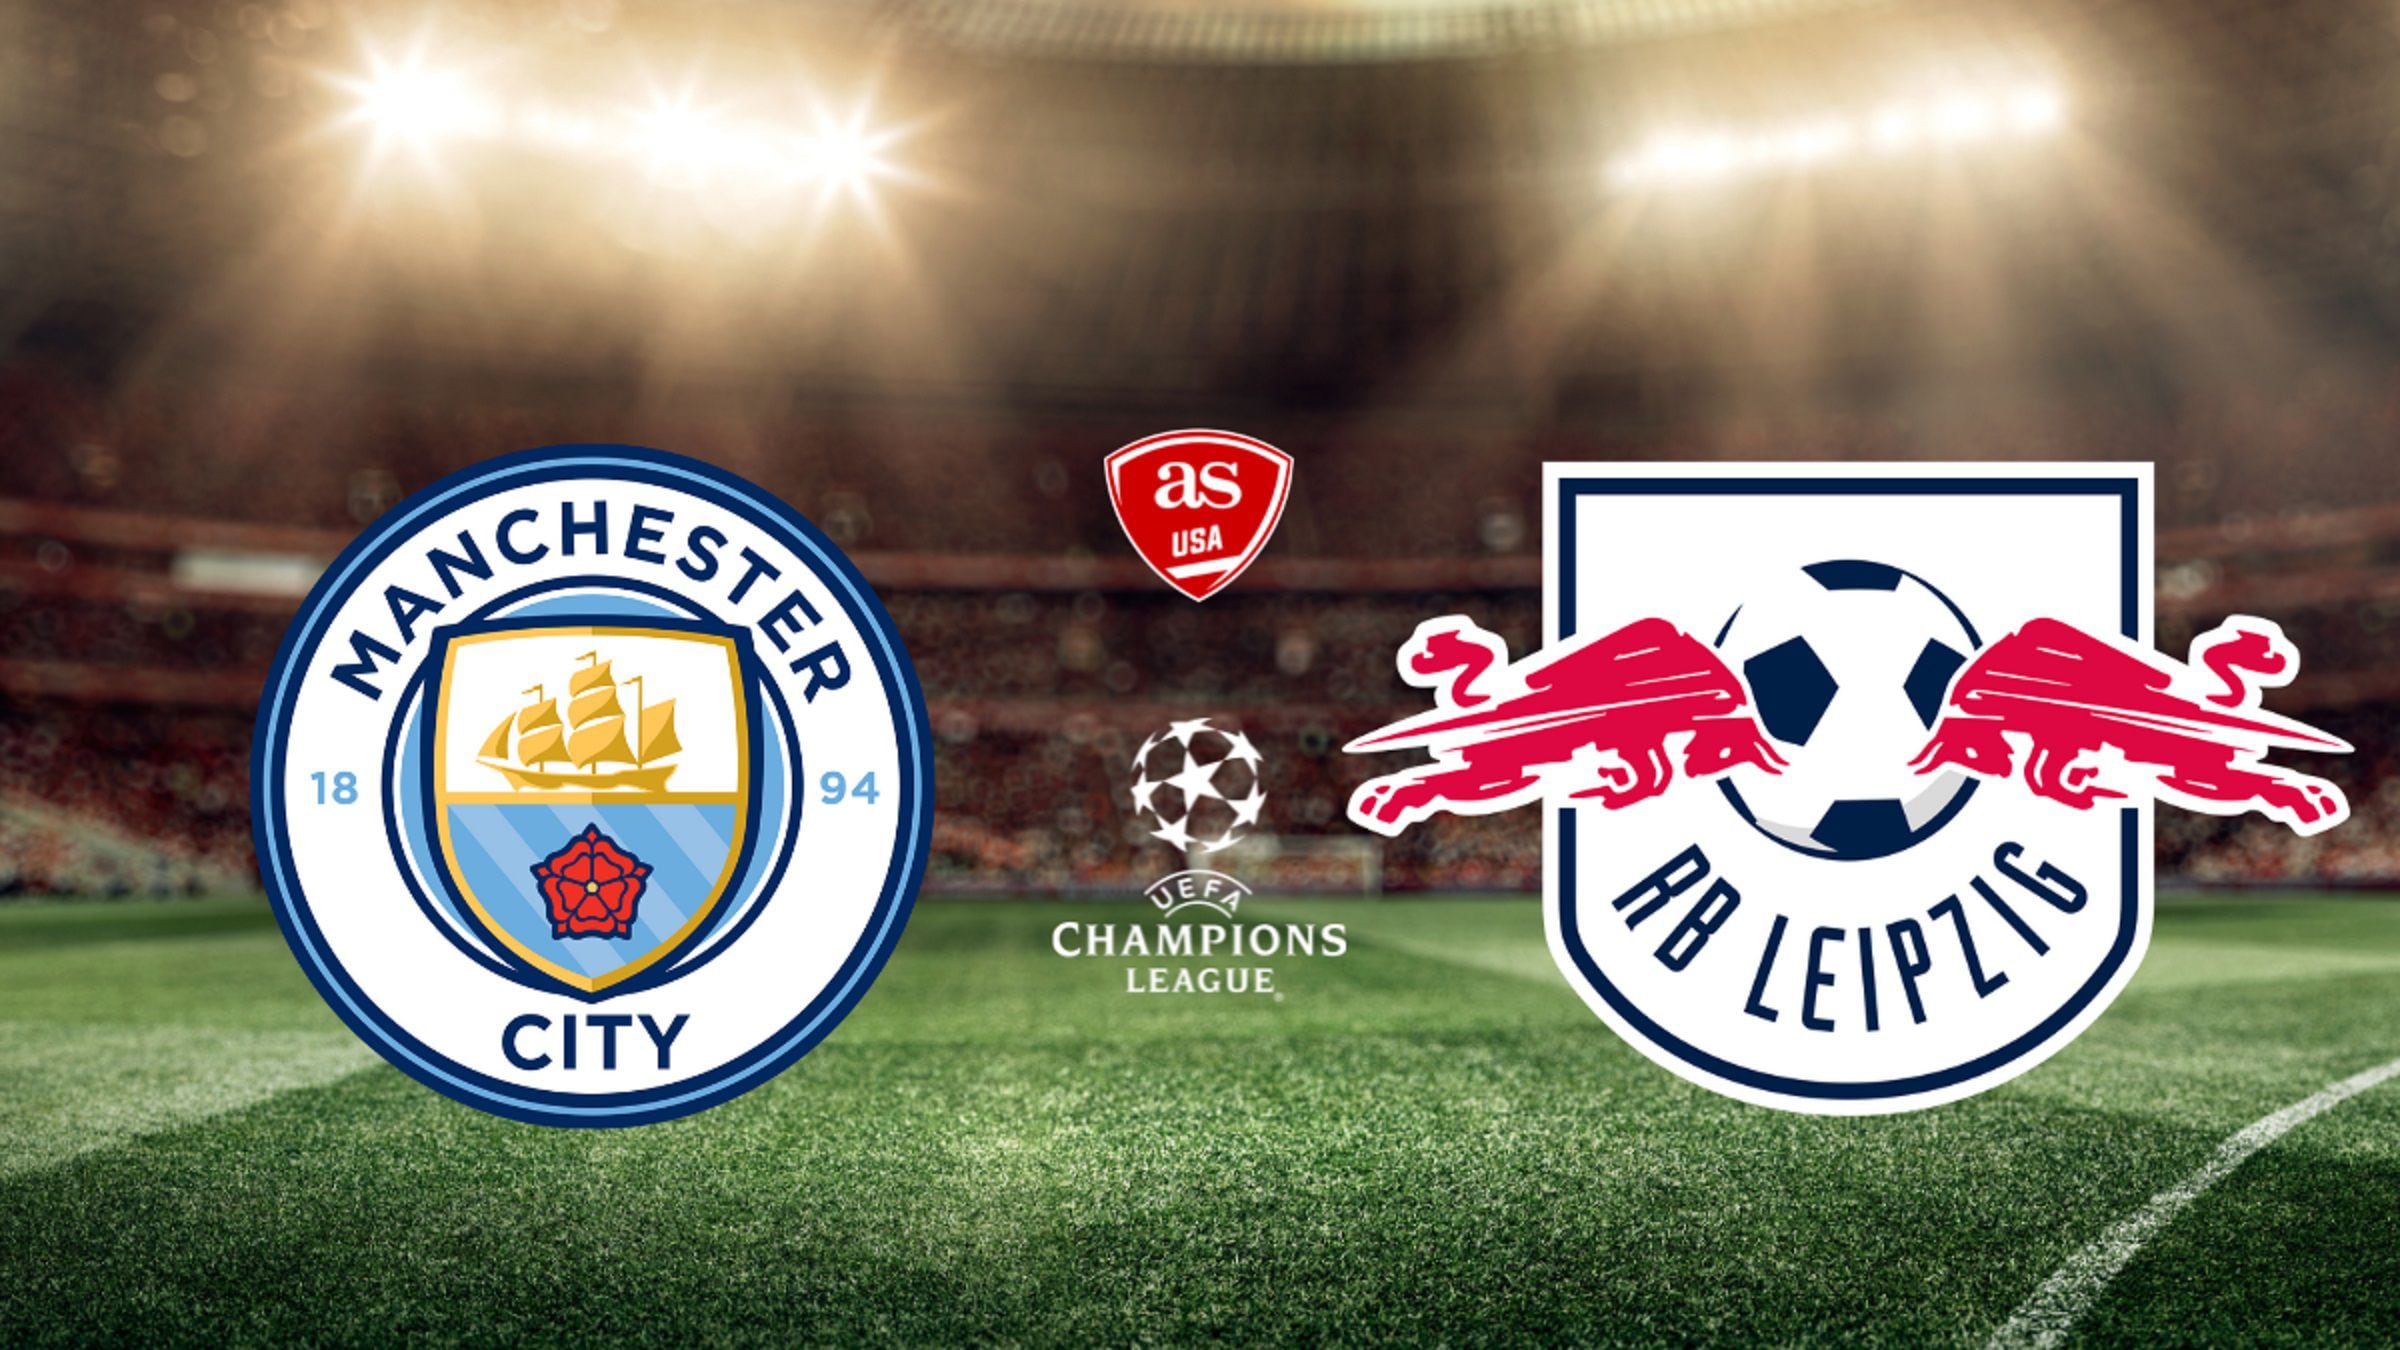 Hello and welcome to Manchester City vs RB Leipzig!